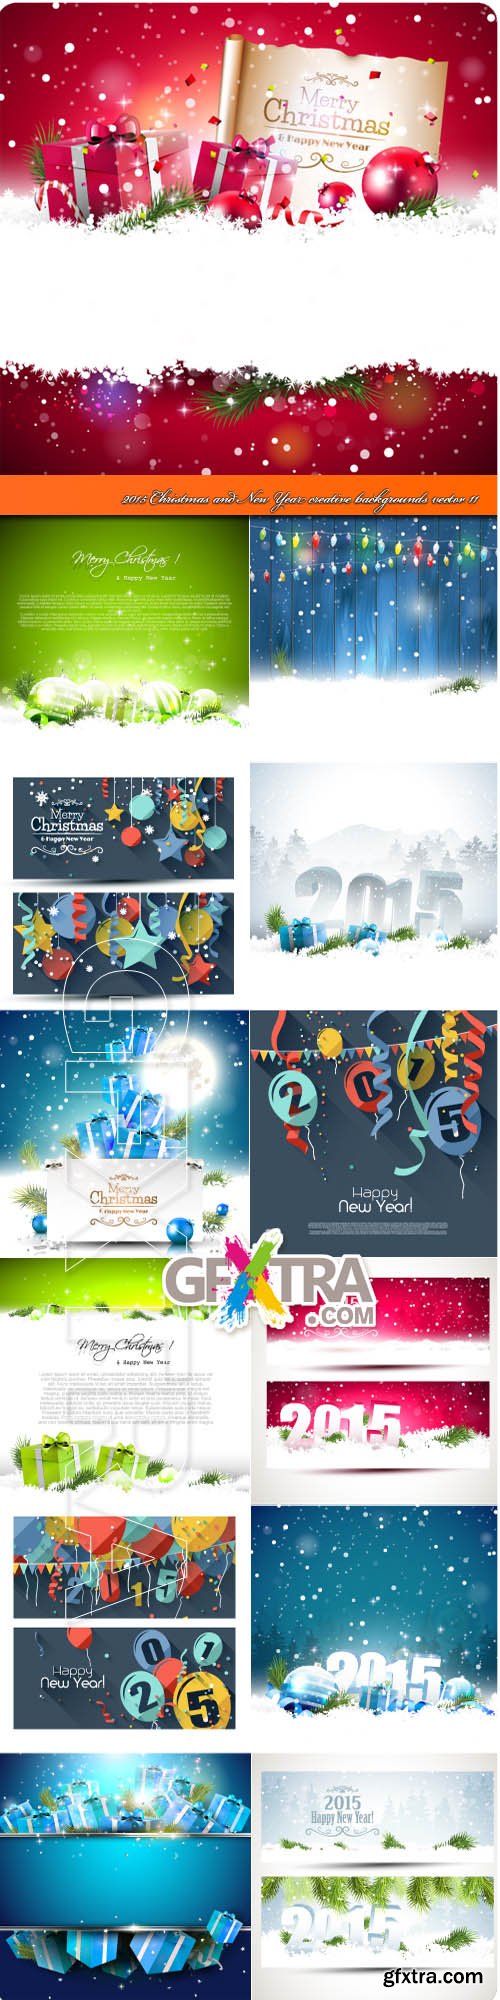 2015 Christmas and New Year creative backgrounds vector 11